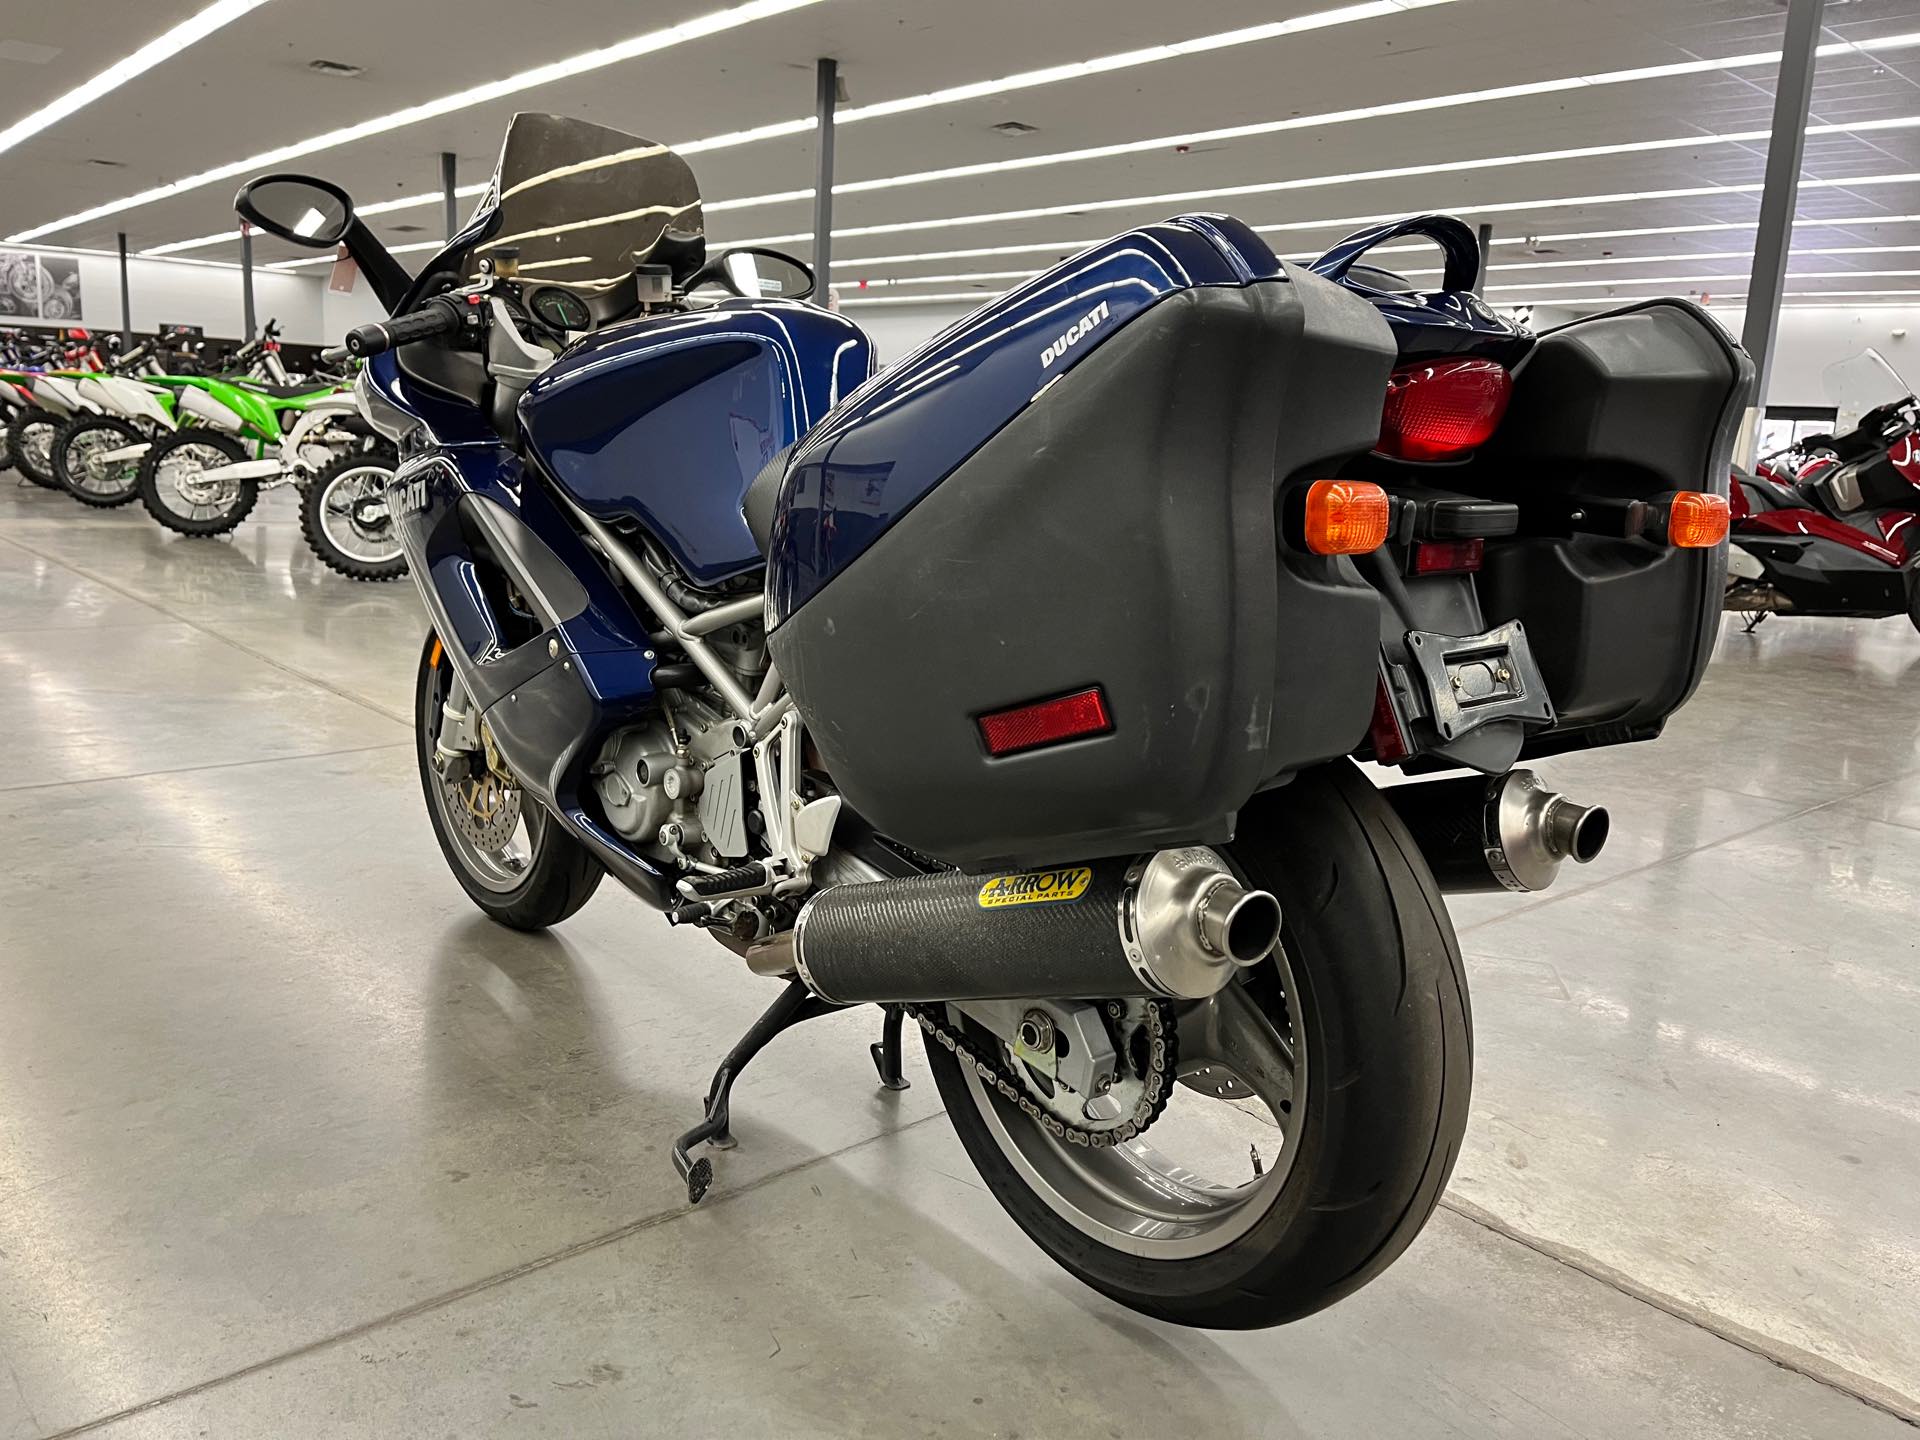 2001 DUCATI ST4 at Aces Motorcycles - Denver